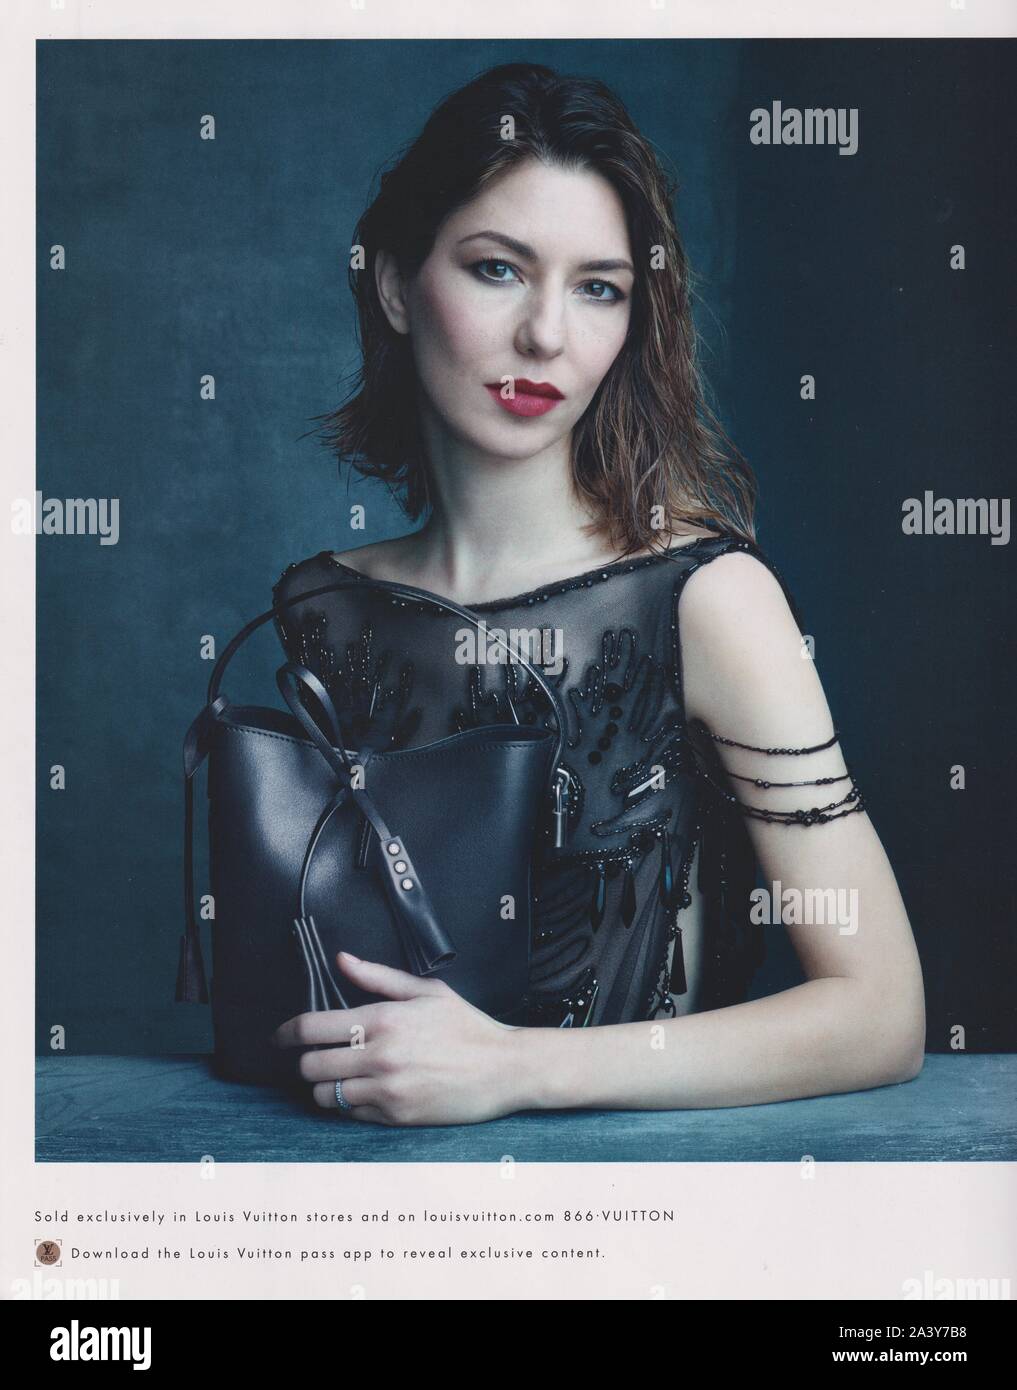 poster advertising Louis Vuitton handbag in paper magazine from